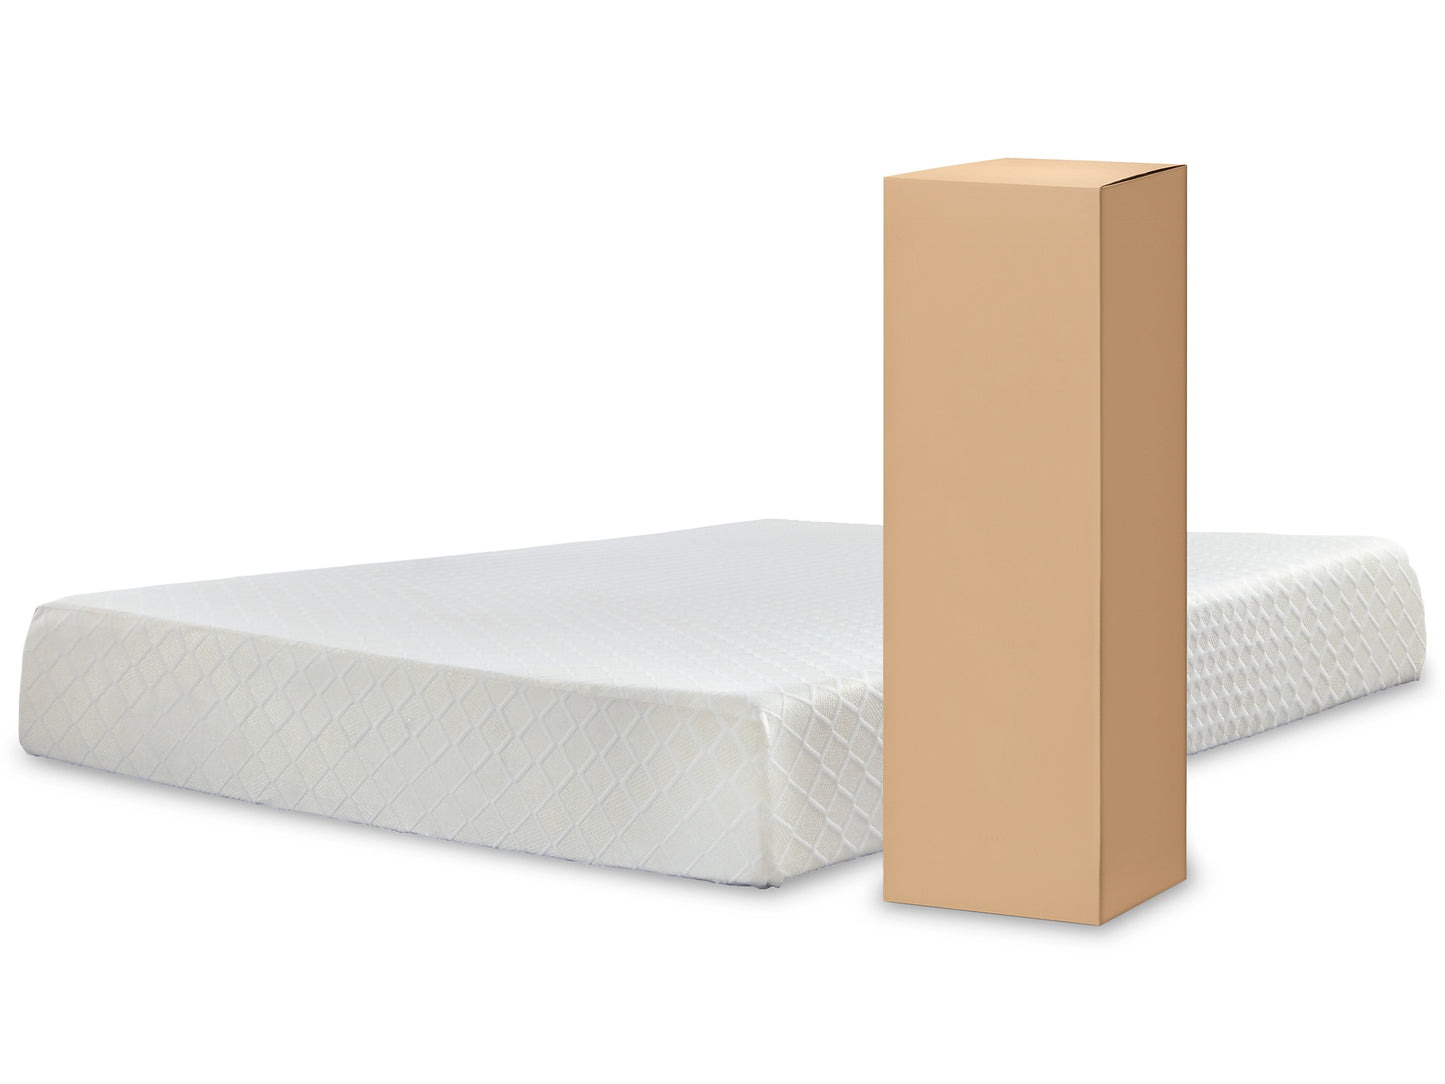 Ashley Express - 10 Inch Chime Memory Foam Mattress with Adjustable Base